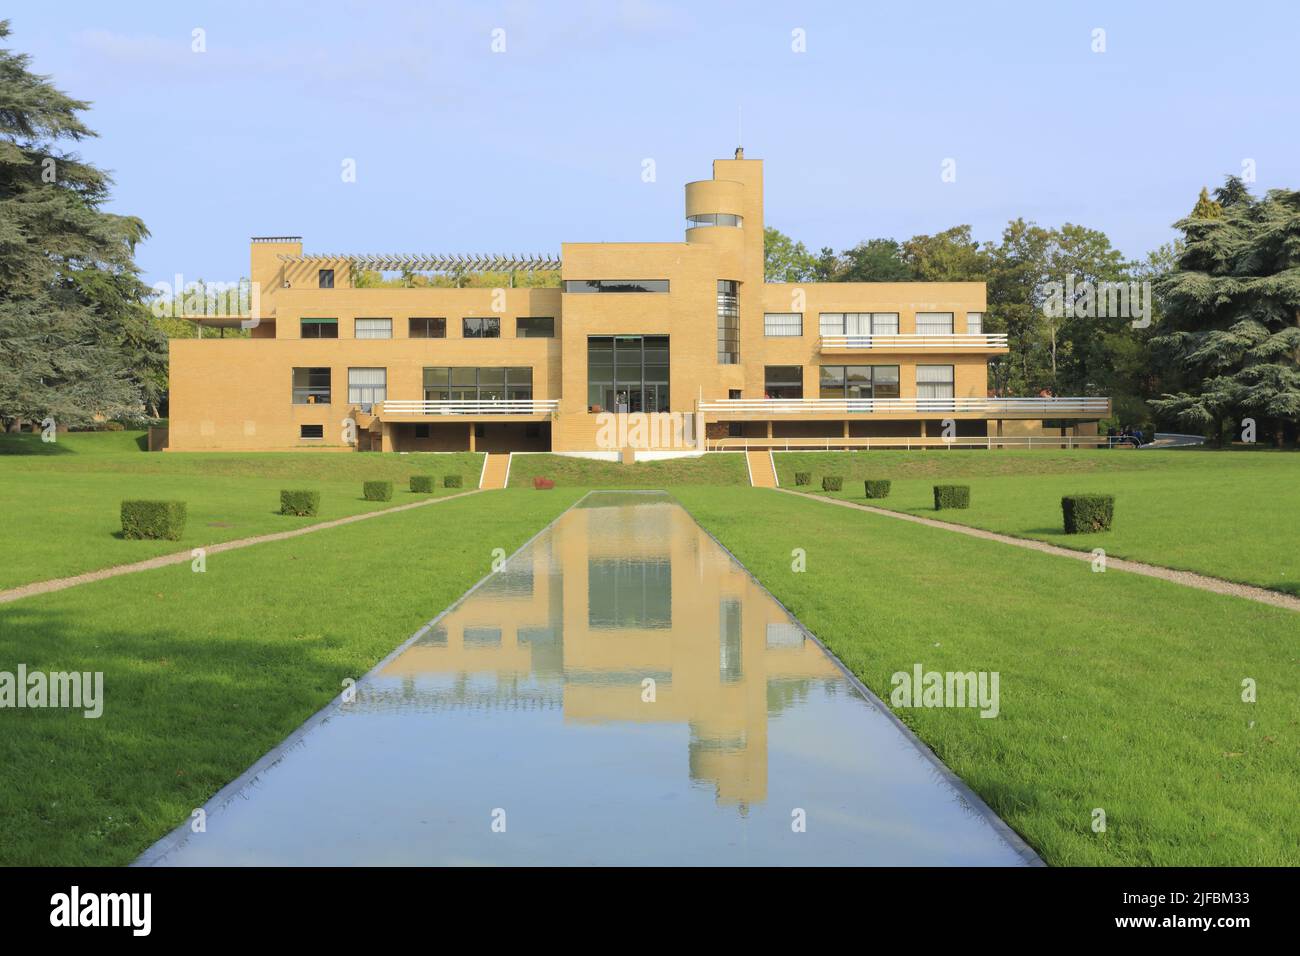 France, Nord, Croix, Villa Cavrois (1932) commissioned by the rich Roubaix textile industrialist Paul Cavrois from the architect Robert Mallet-Stevens, south facade Stock Photo